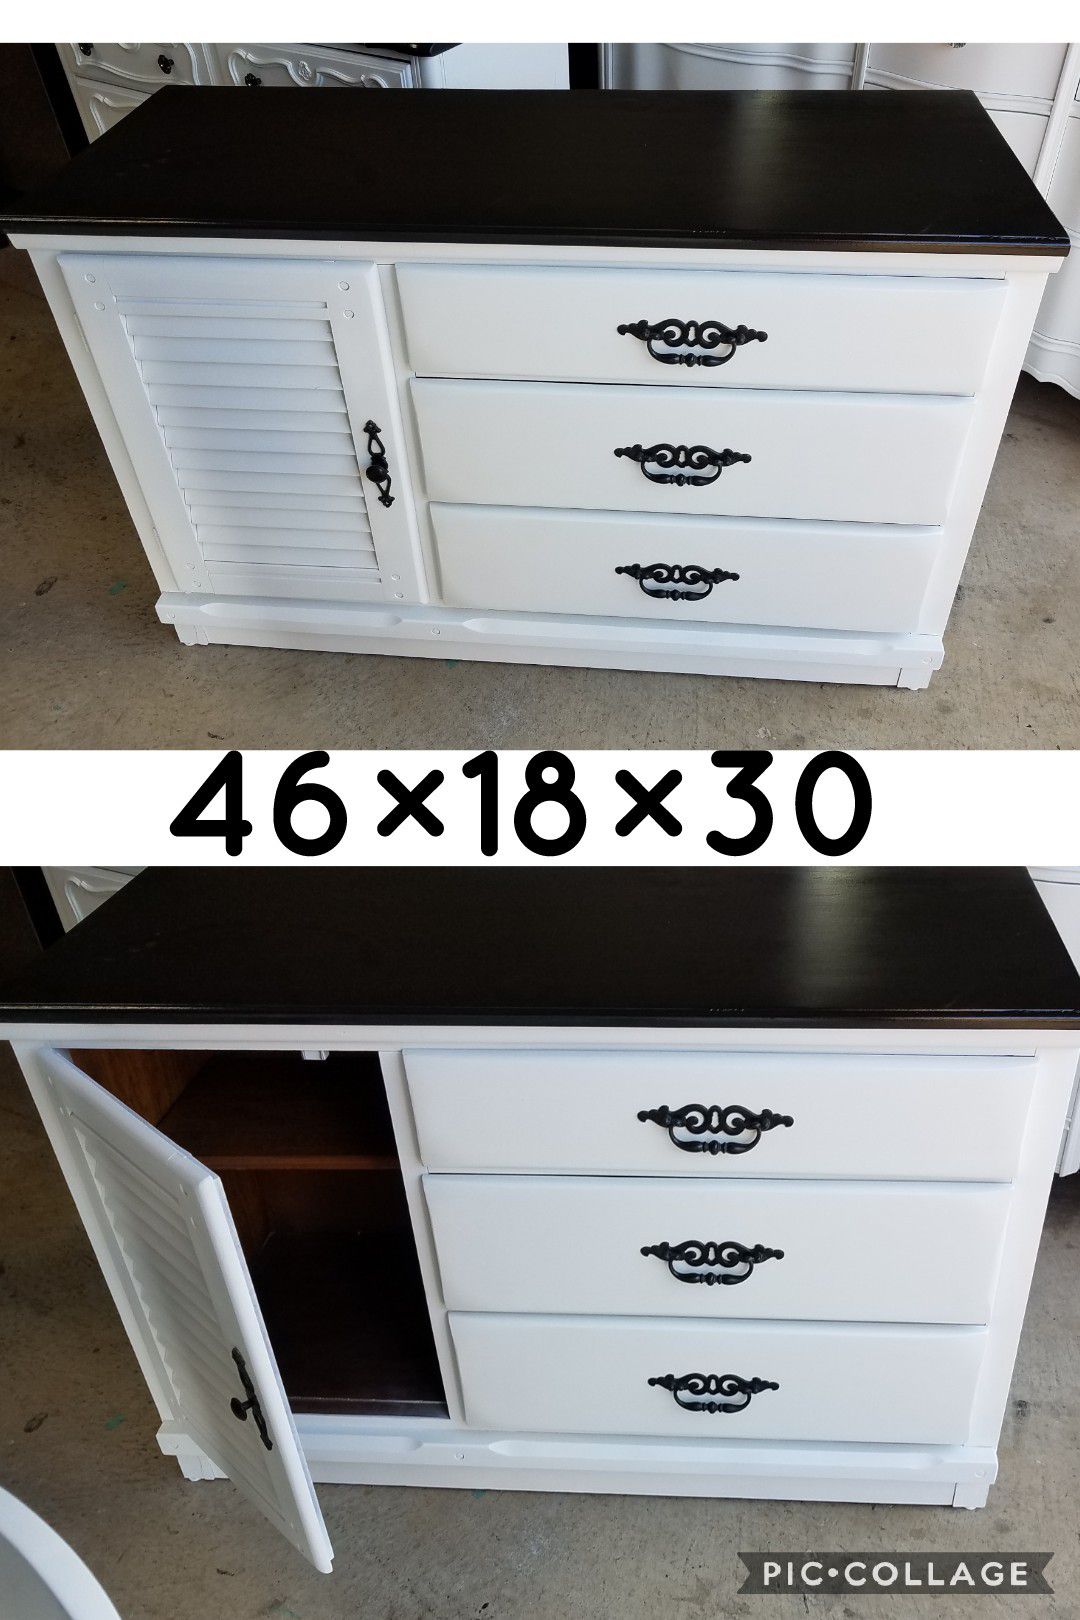 TV table/entryway refinished white and black